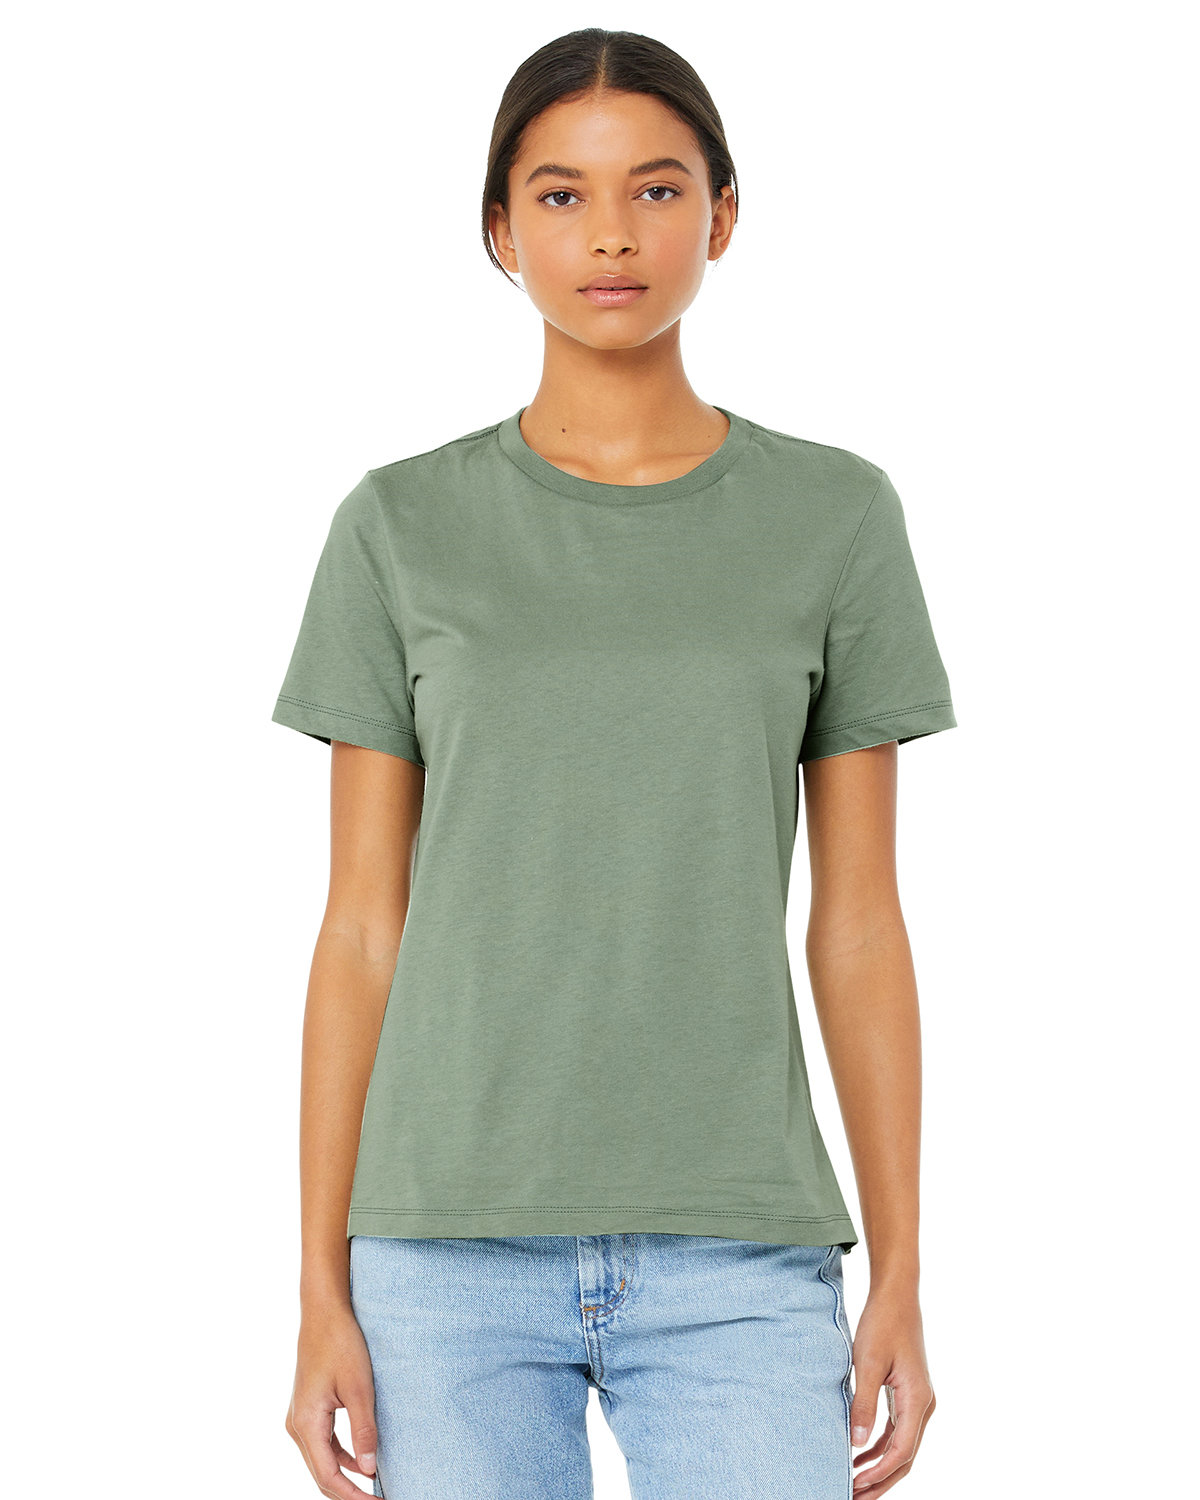 Bella + Canvas Ladies' Relaxed Jersey Short-Sleeve T-Shirt SAGE 